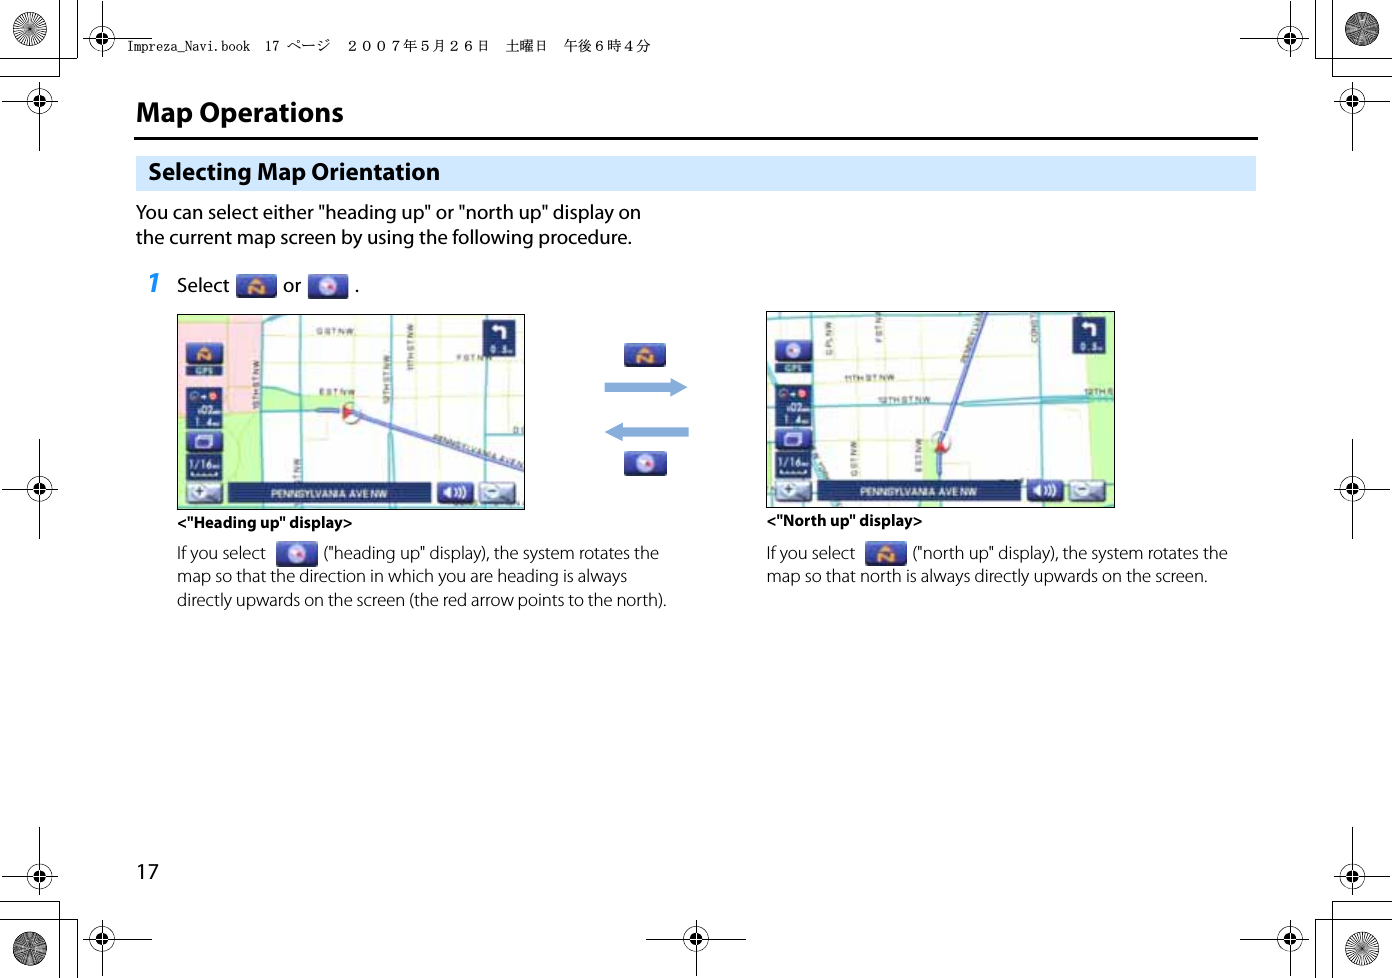 17Map OperationsSelecting Map OrientationYou can select either &quot;heading up&quot; or &quot;north up&quot; display on the current map screen by using the following procedure.1Select or .If you select (&quot;heading up&quot; display), the system rotates the map so that the direction in which you are heading is always directly upwards on the screen (the red arrow points to the north).If you select (&quot;north up&quot; display), the system rotates the map so that north is always directly upwards on the screen.&lt;&quot;Heading up&quot; display&gt; &lt;&quot;North up&quot; display&gt;+ORTG\CA0CXKDQQMࡍ࡯ࠫ㧞㧜㧜㧣ᐕ㧡᦬㧞㧢ᣣޓ࿯ᦐᣣޓඦᓟ㧢ᤨ㧠ಽ